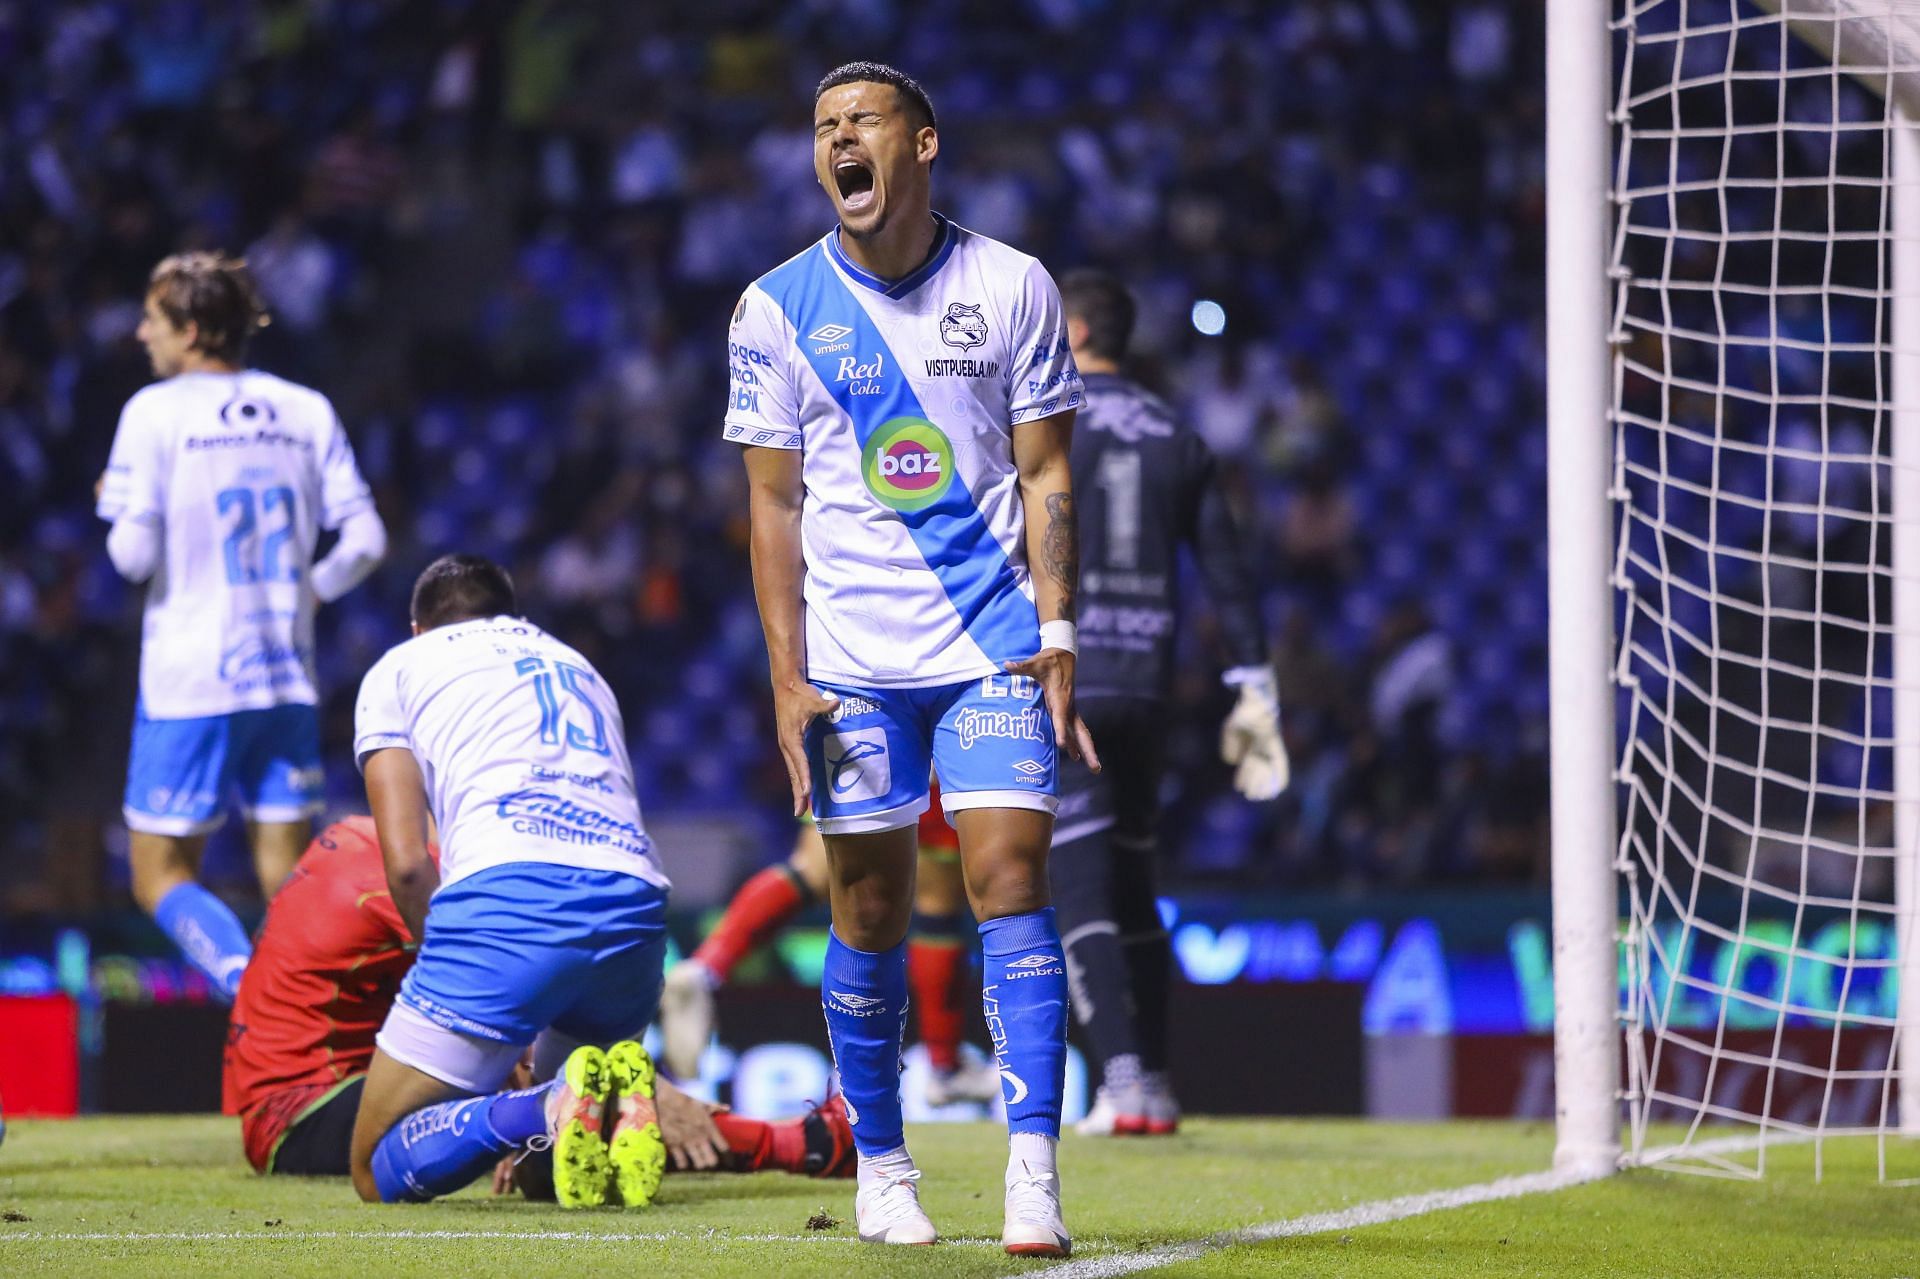 Puebla are looking to climb to the top of the table